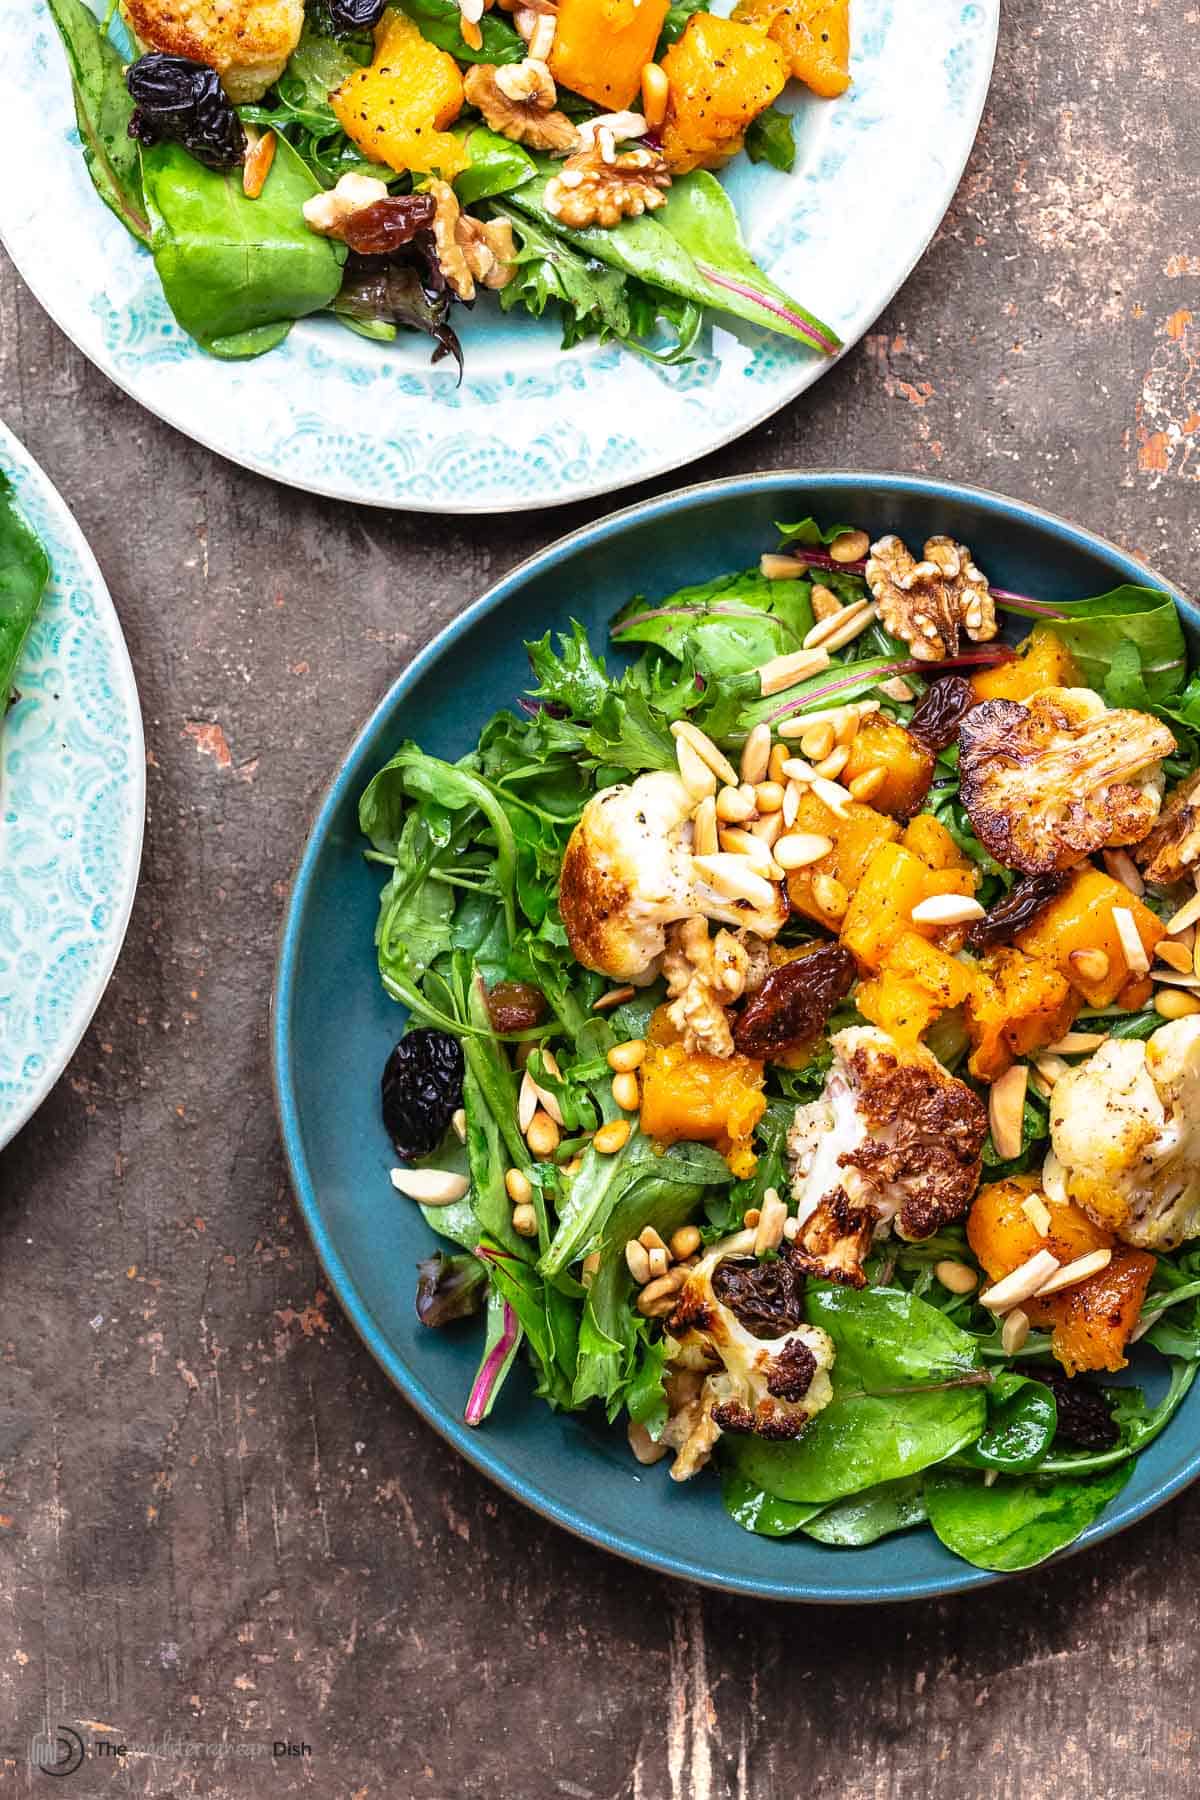 two plates with a bed of greens, roasted cauliflower and butternut salad, topped with raisins and nuts